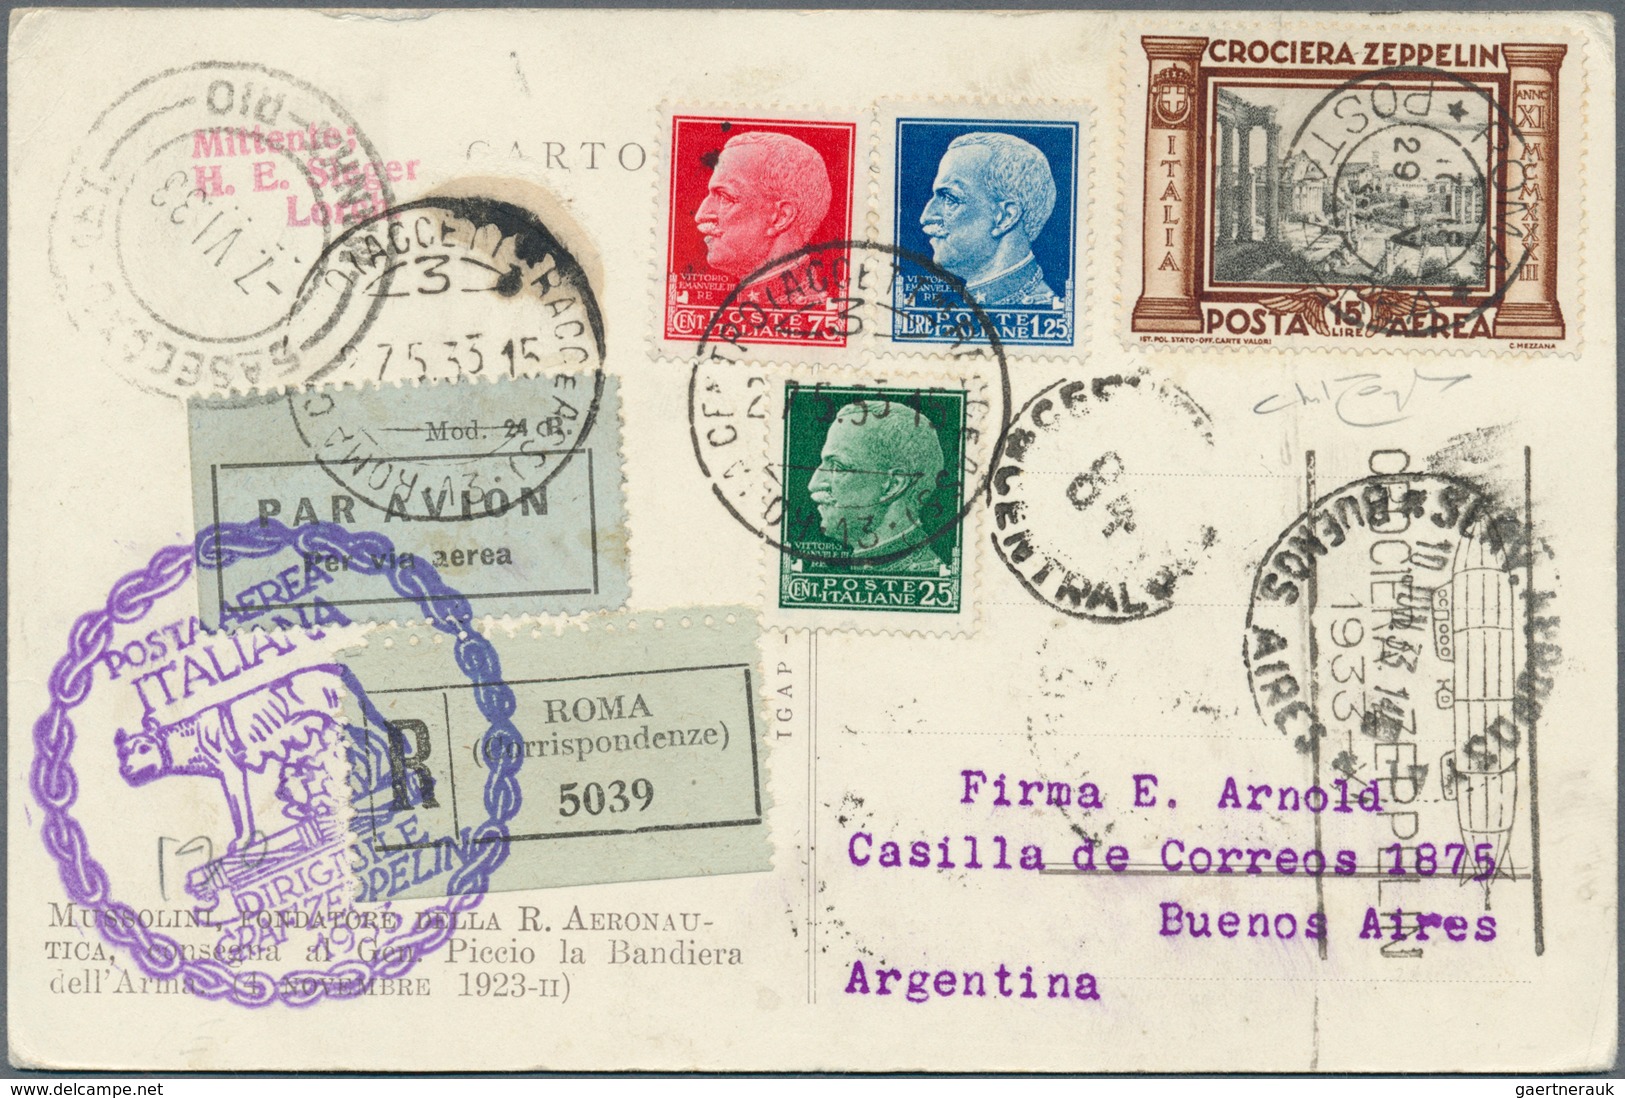 Zeppelinpost Europa: 1933, ITALY TRIP LZ 127, group of 13 covers/cards franked with Italian (12) and